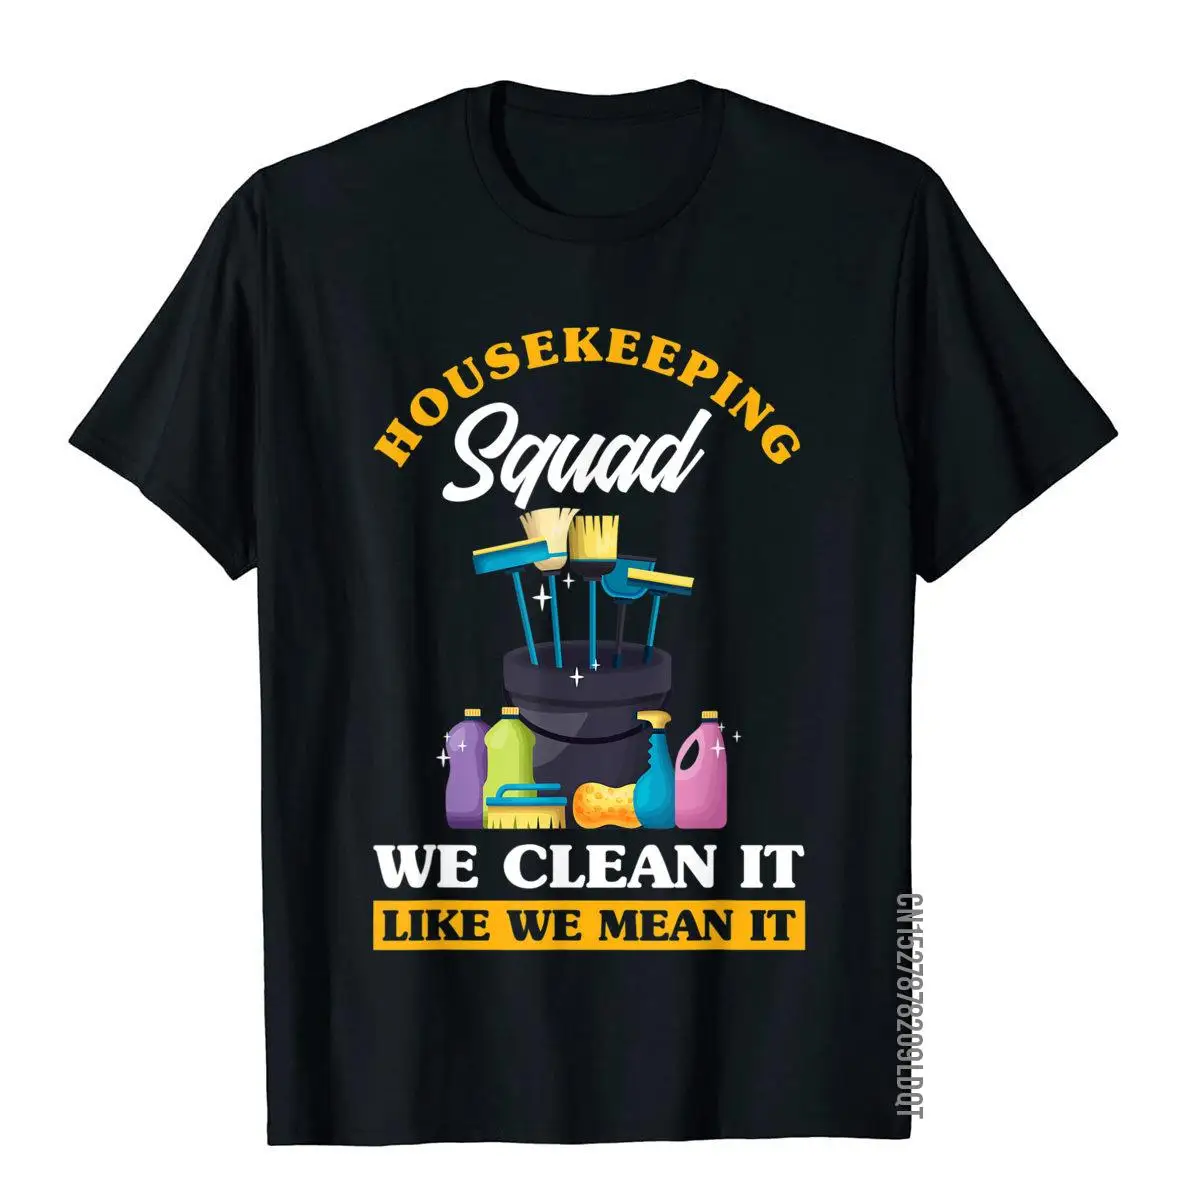 

Housekeeping Squad We Clean It Like We Mean It Housekeeper T-Shirt Printed Tops T Shirt For Adult Cotton T Shirts On Sale